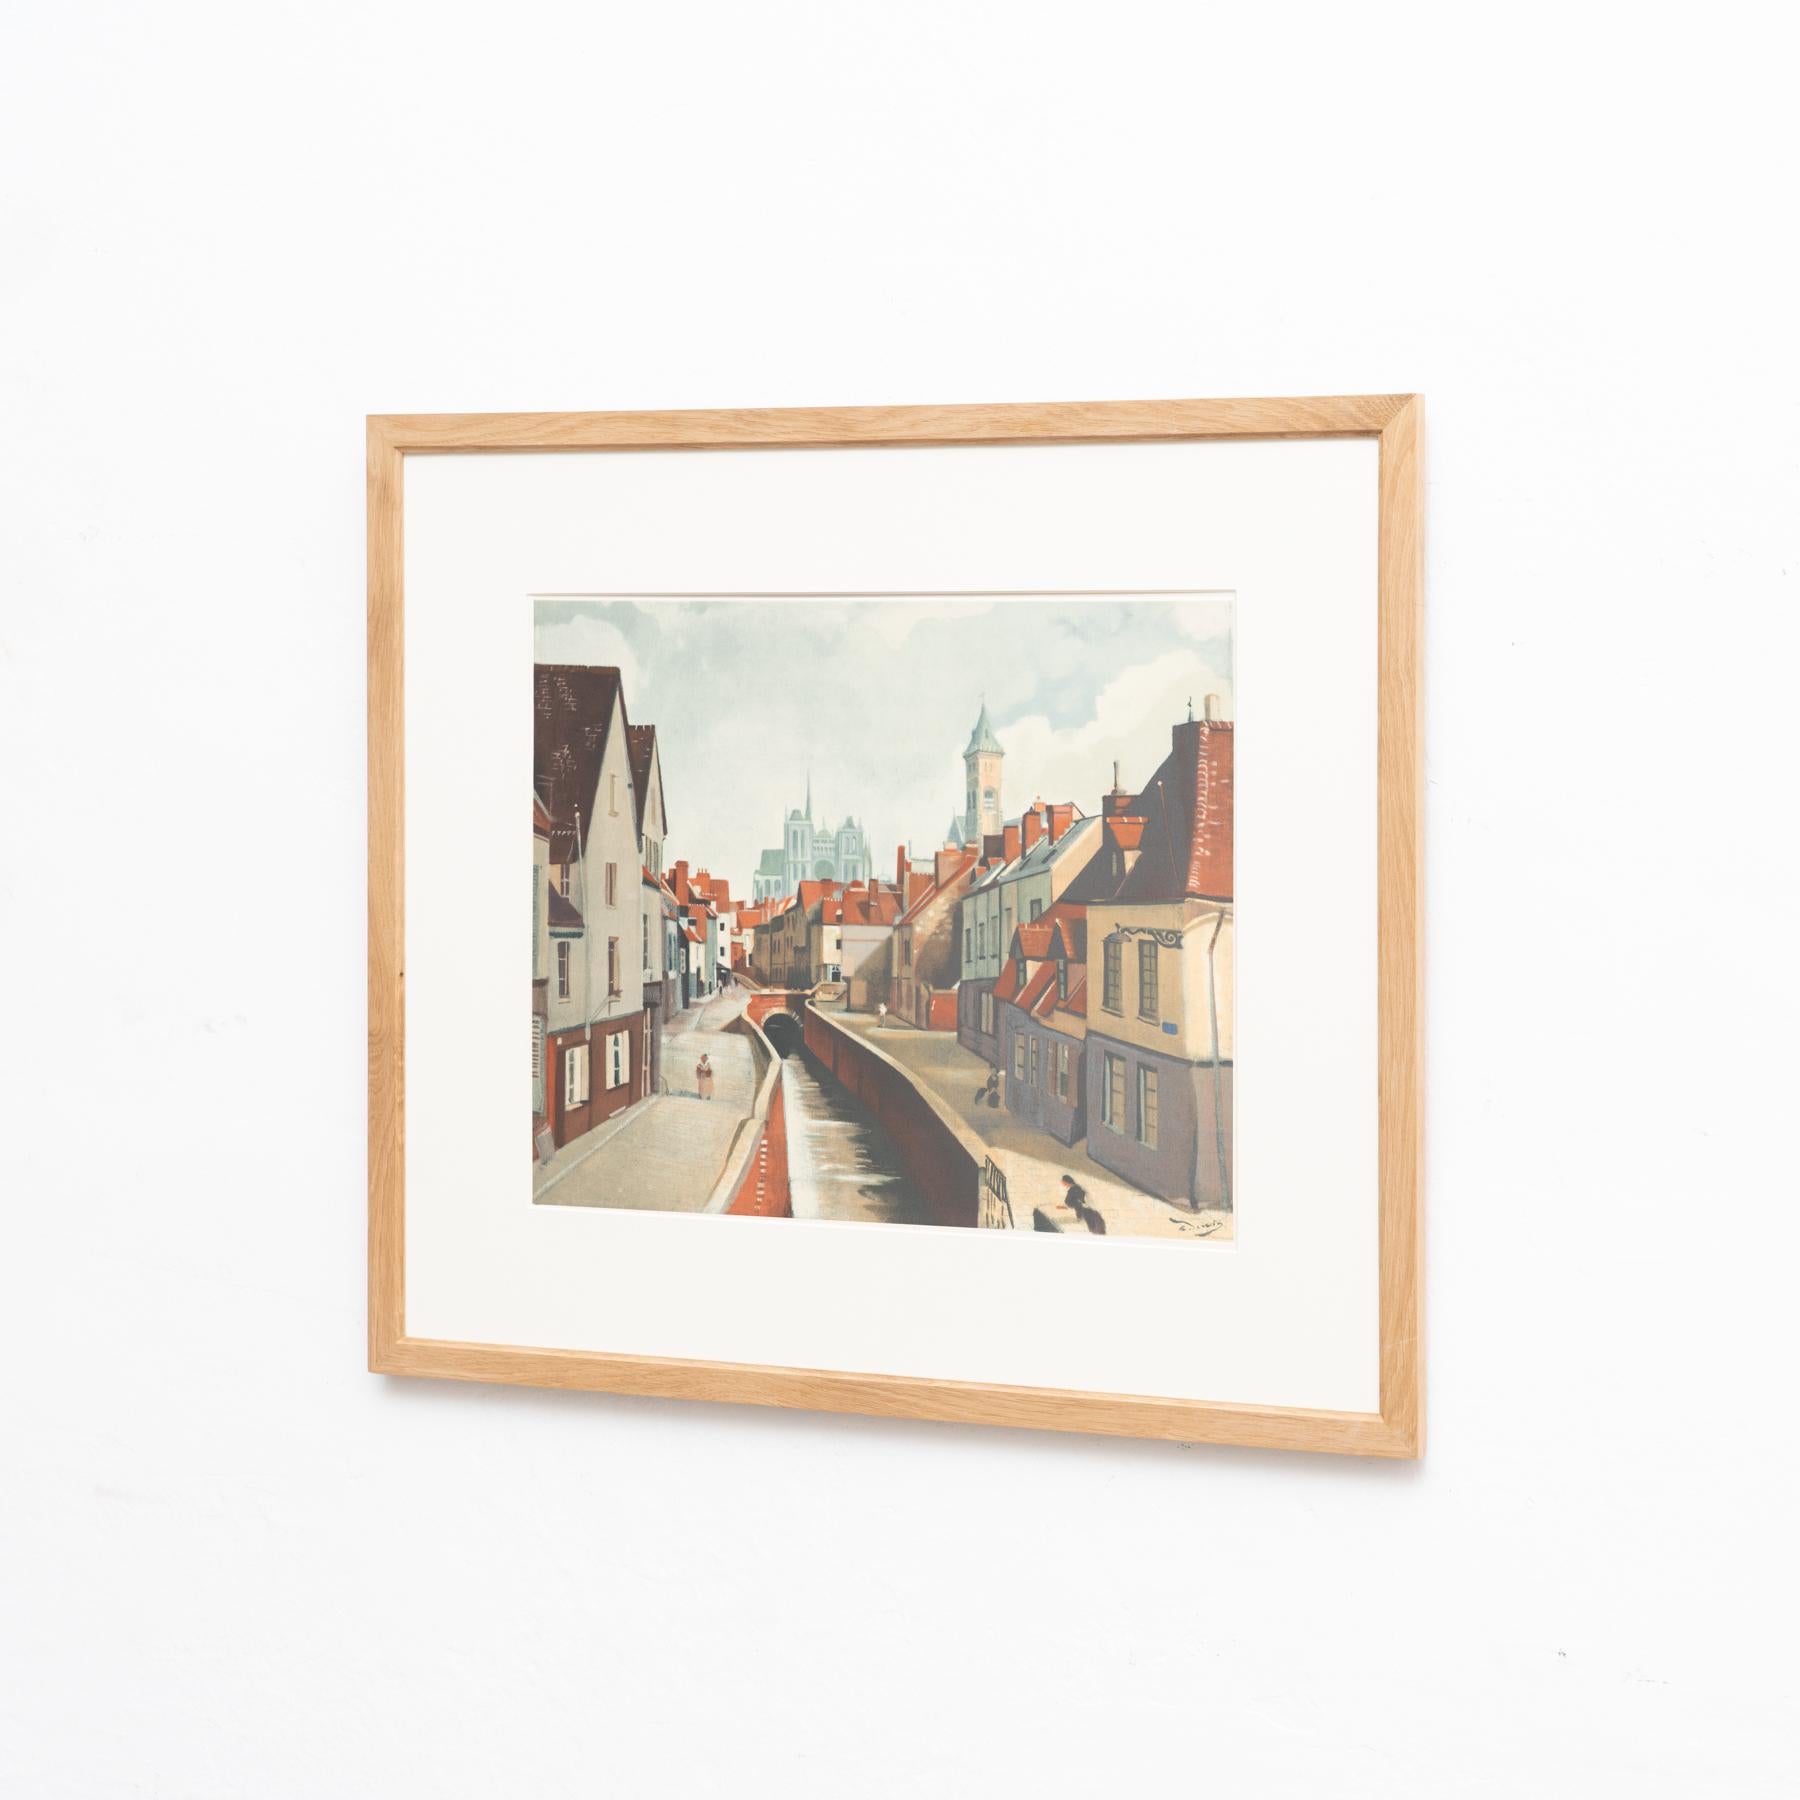 Original 'Amiens' color lithograph by André Derain.

Lithograph printed from an original painting made by the author in France, circa 1947.

Published by Mourlot in Collection Pierre Levy in 1970, Paris. 

Framed and signed in the stone.

In